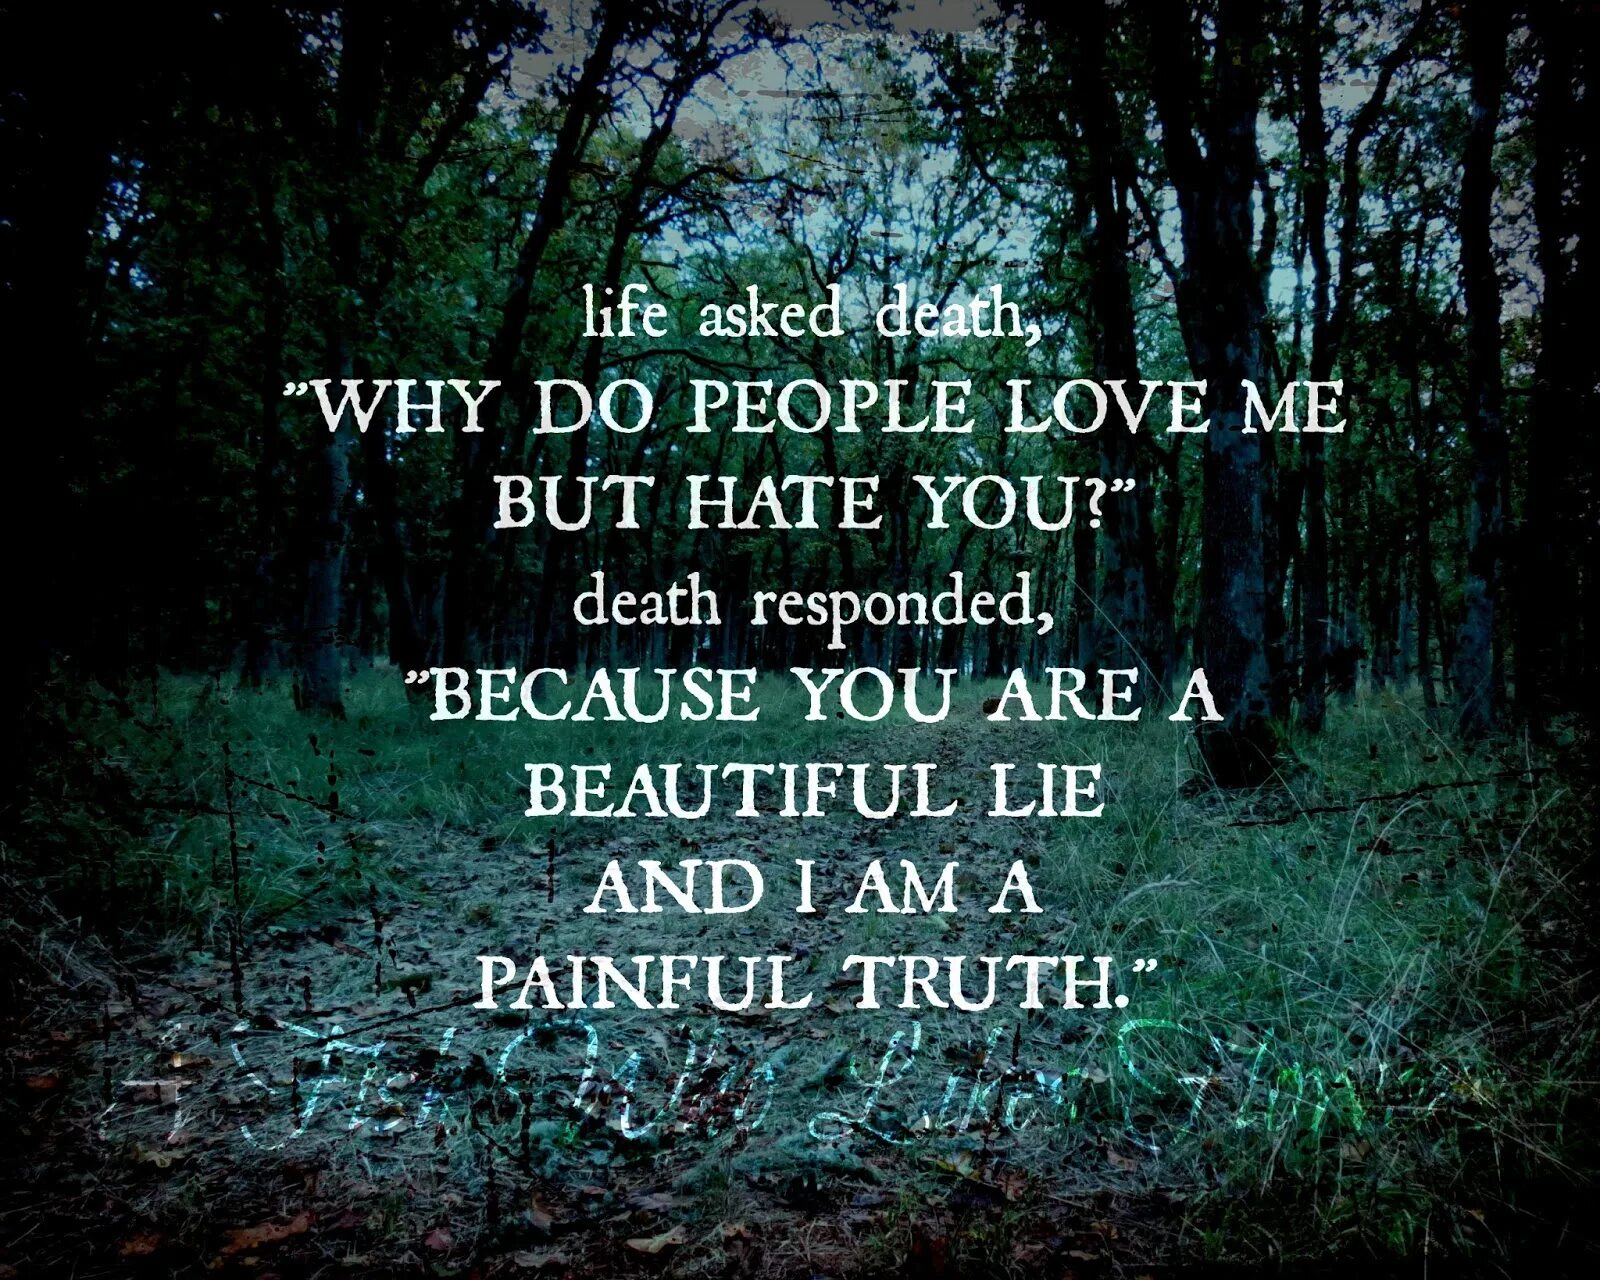 Life is dead. Quotes about Death and Life. Quotes about Death. Beautiful Death quotes. Life and Death.